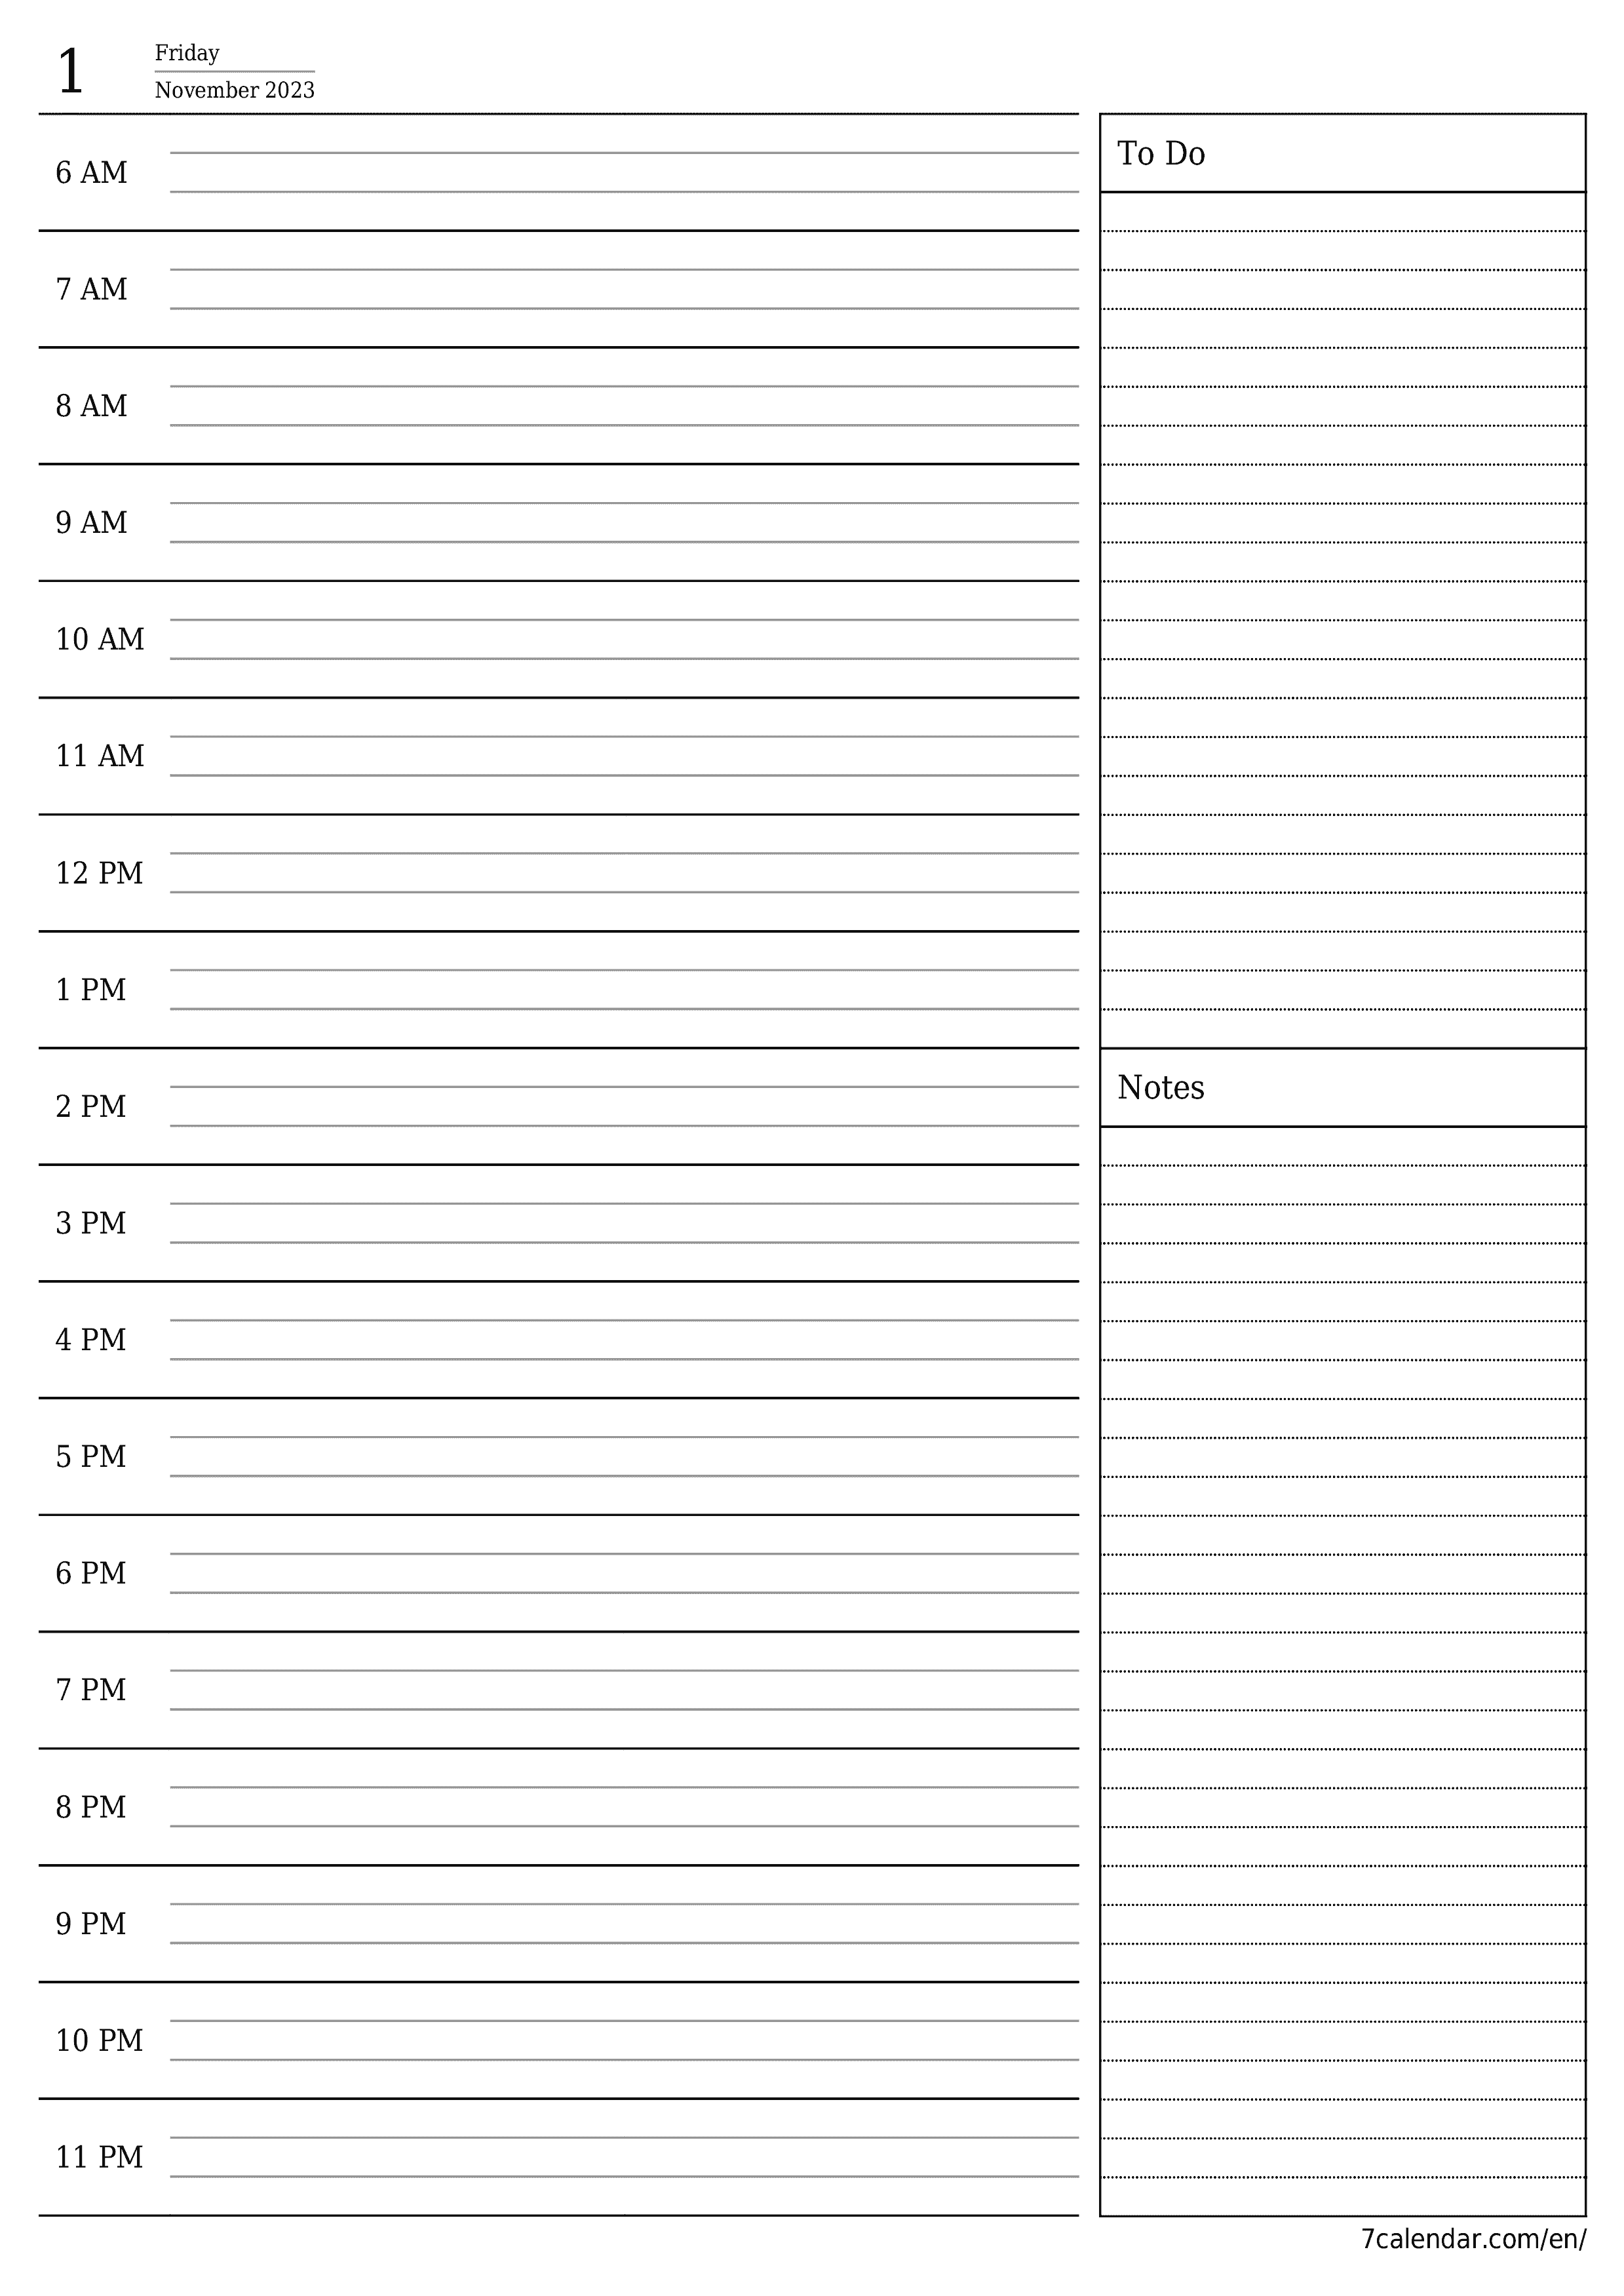 Blank daily printable calendar and planner for day November 2023 with notes, save and print to PDF PNG English